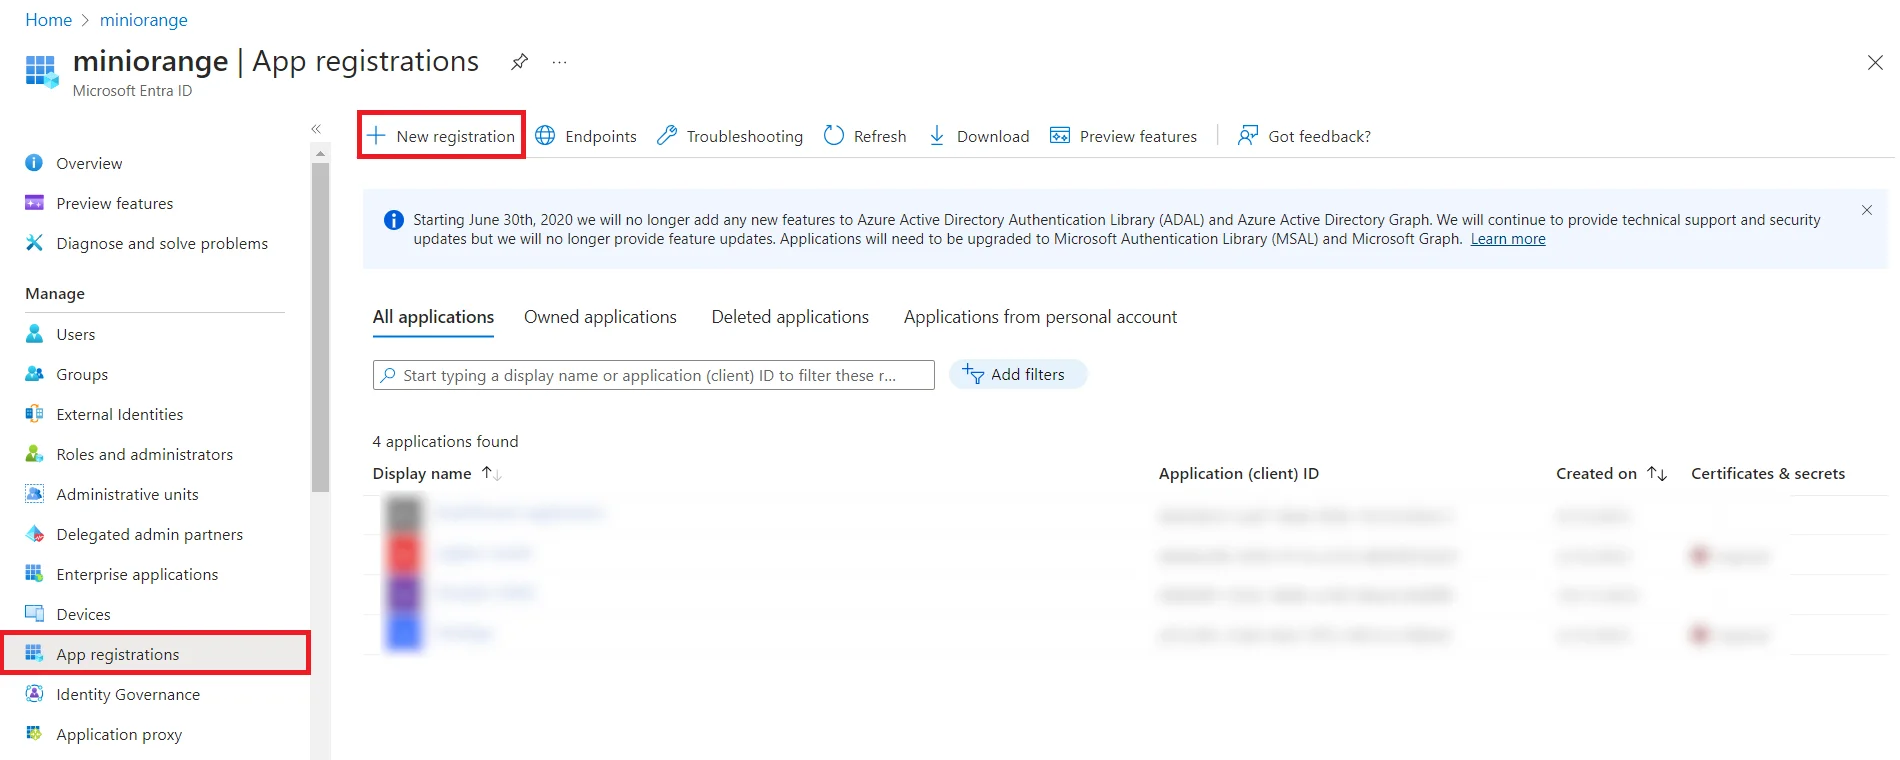 nopCommerce OAuth Single Sign-On (SSO) using Azure AD as IDP - App-Registration